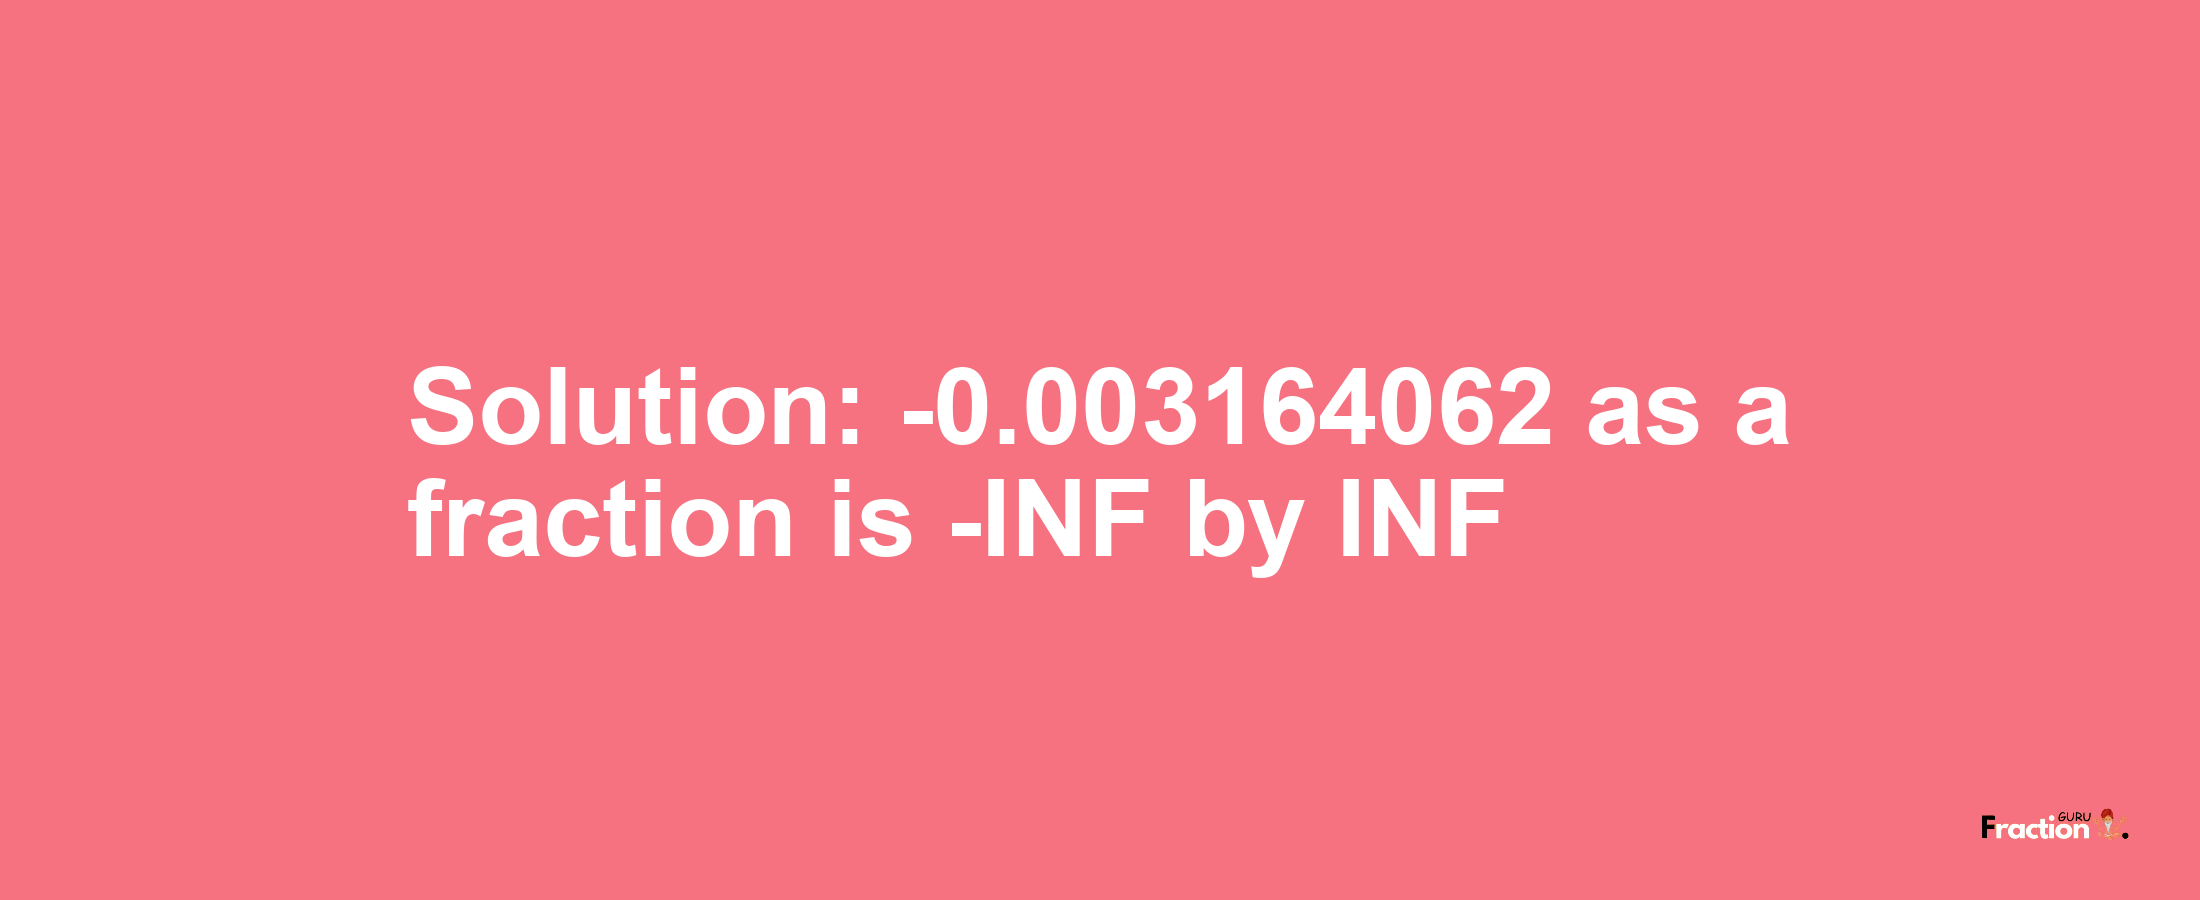 Solution:-0.003164062 as a fraction is -INF/INF